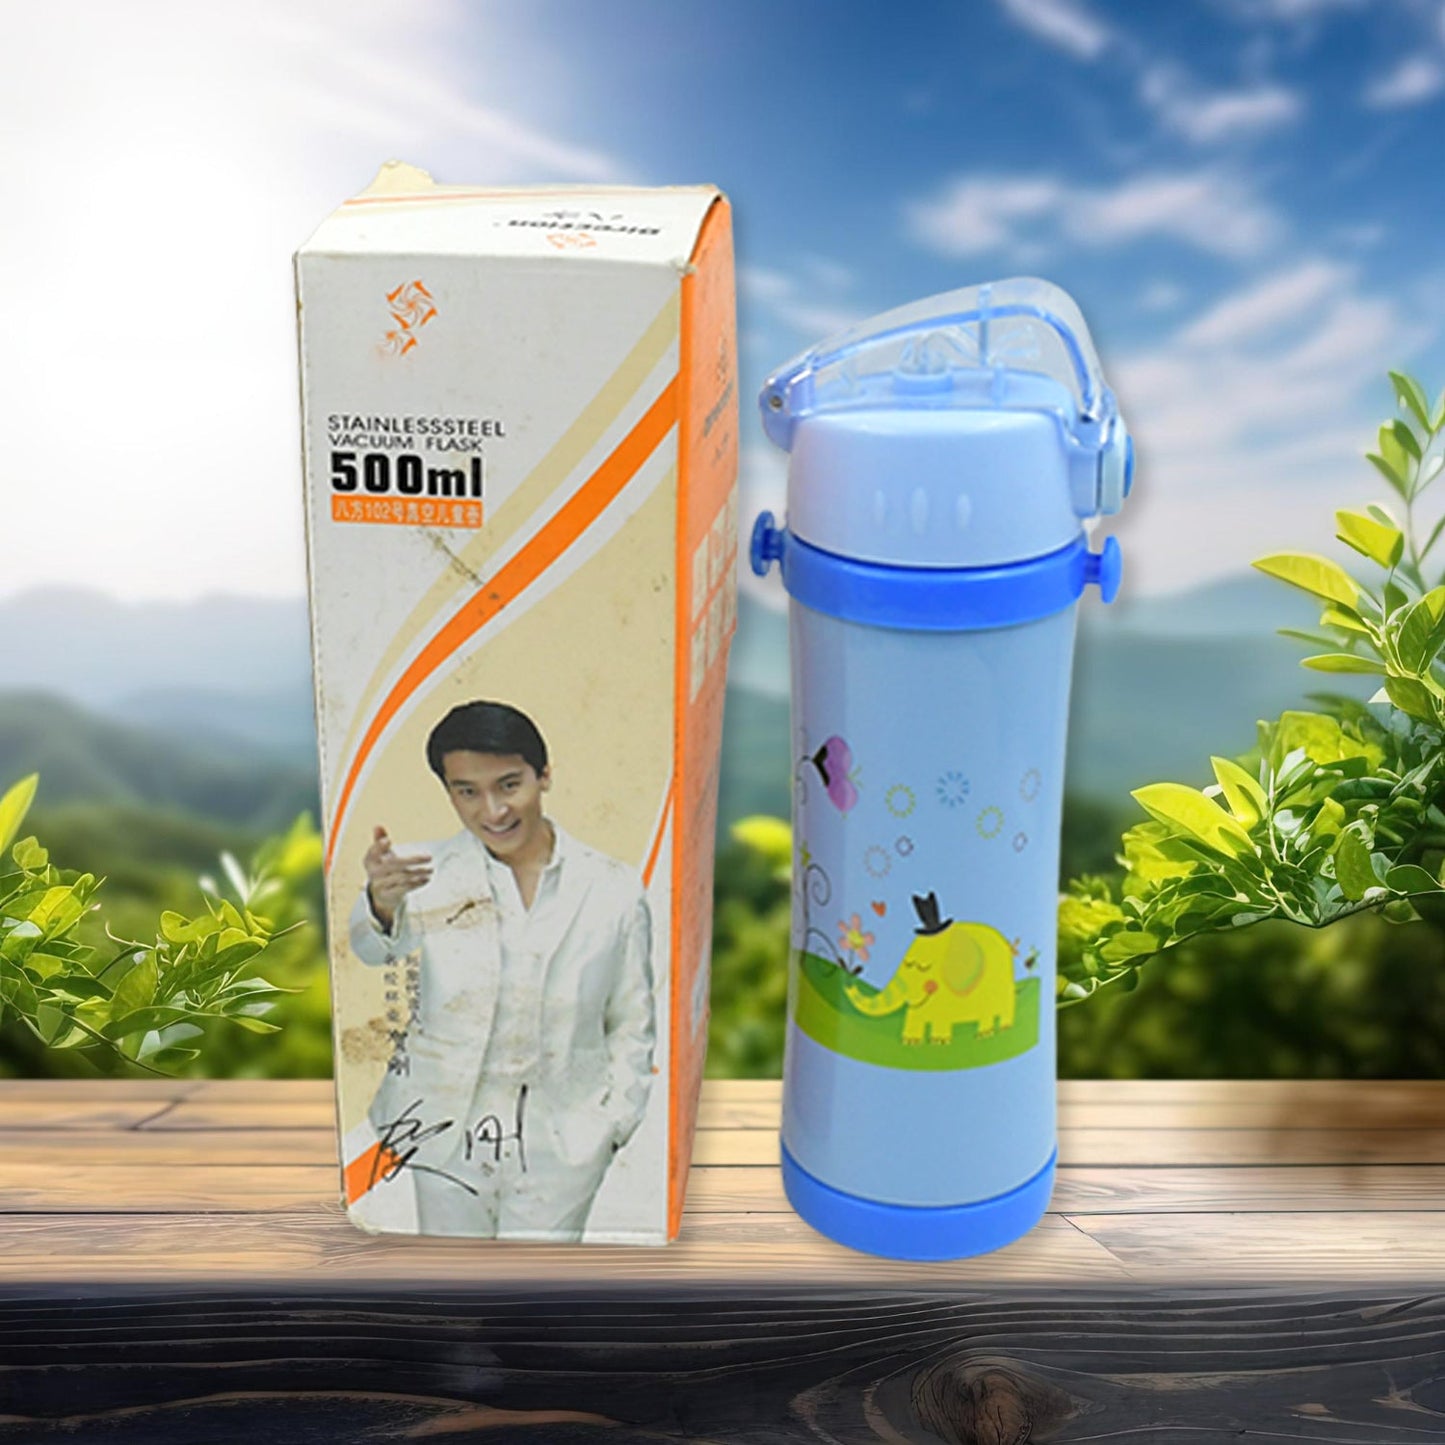 8310 Stainless Steel Vacuum Flask Insulated Water Bottle Specially Designed Push Button Sipper Water Bottle with Soft Straw and Neck Strap, For Sports And Travel , STAINLESS STEEL SPORTS WATER BOTTLES, STEEL FRIDGE BOTTLE FOR OFFICE/GYM/SCHOOL (500ML)